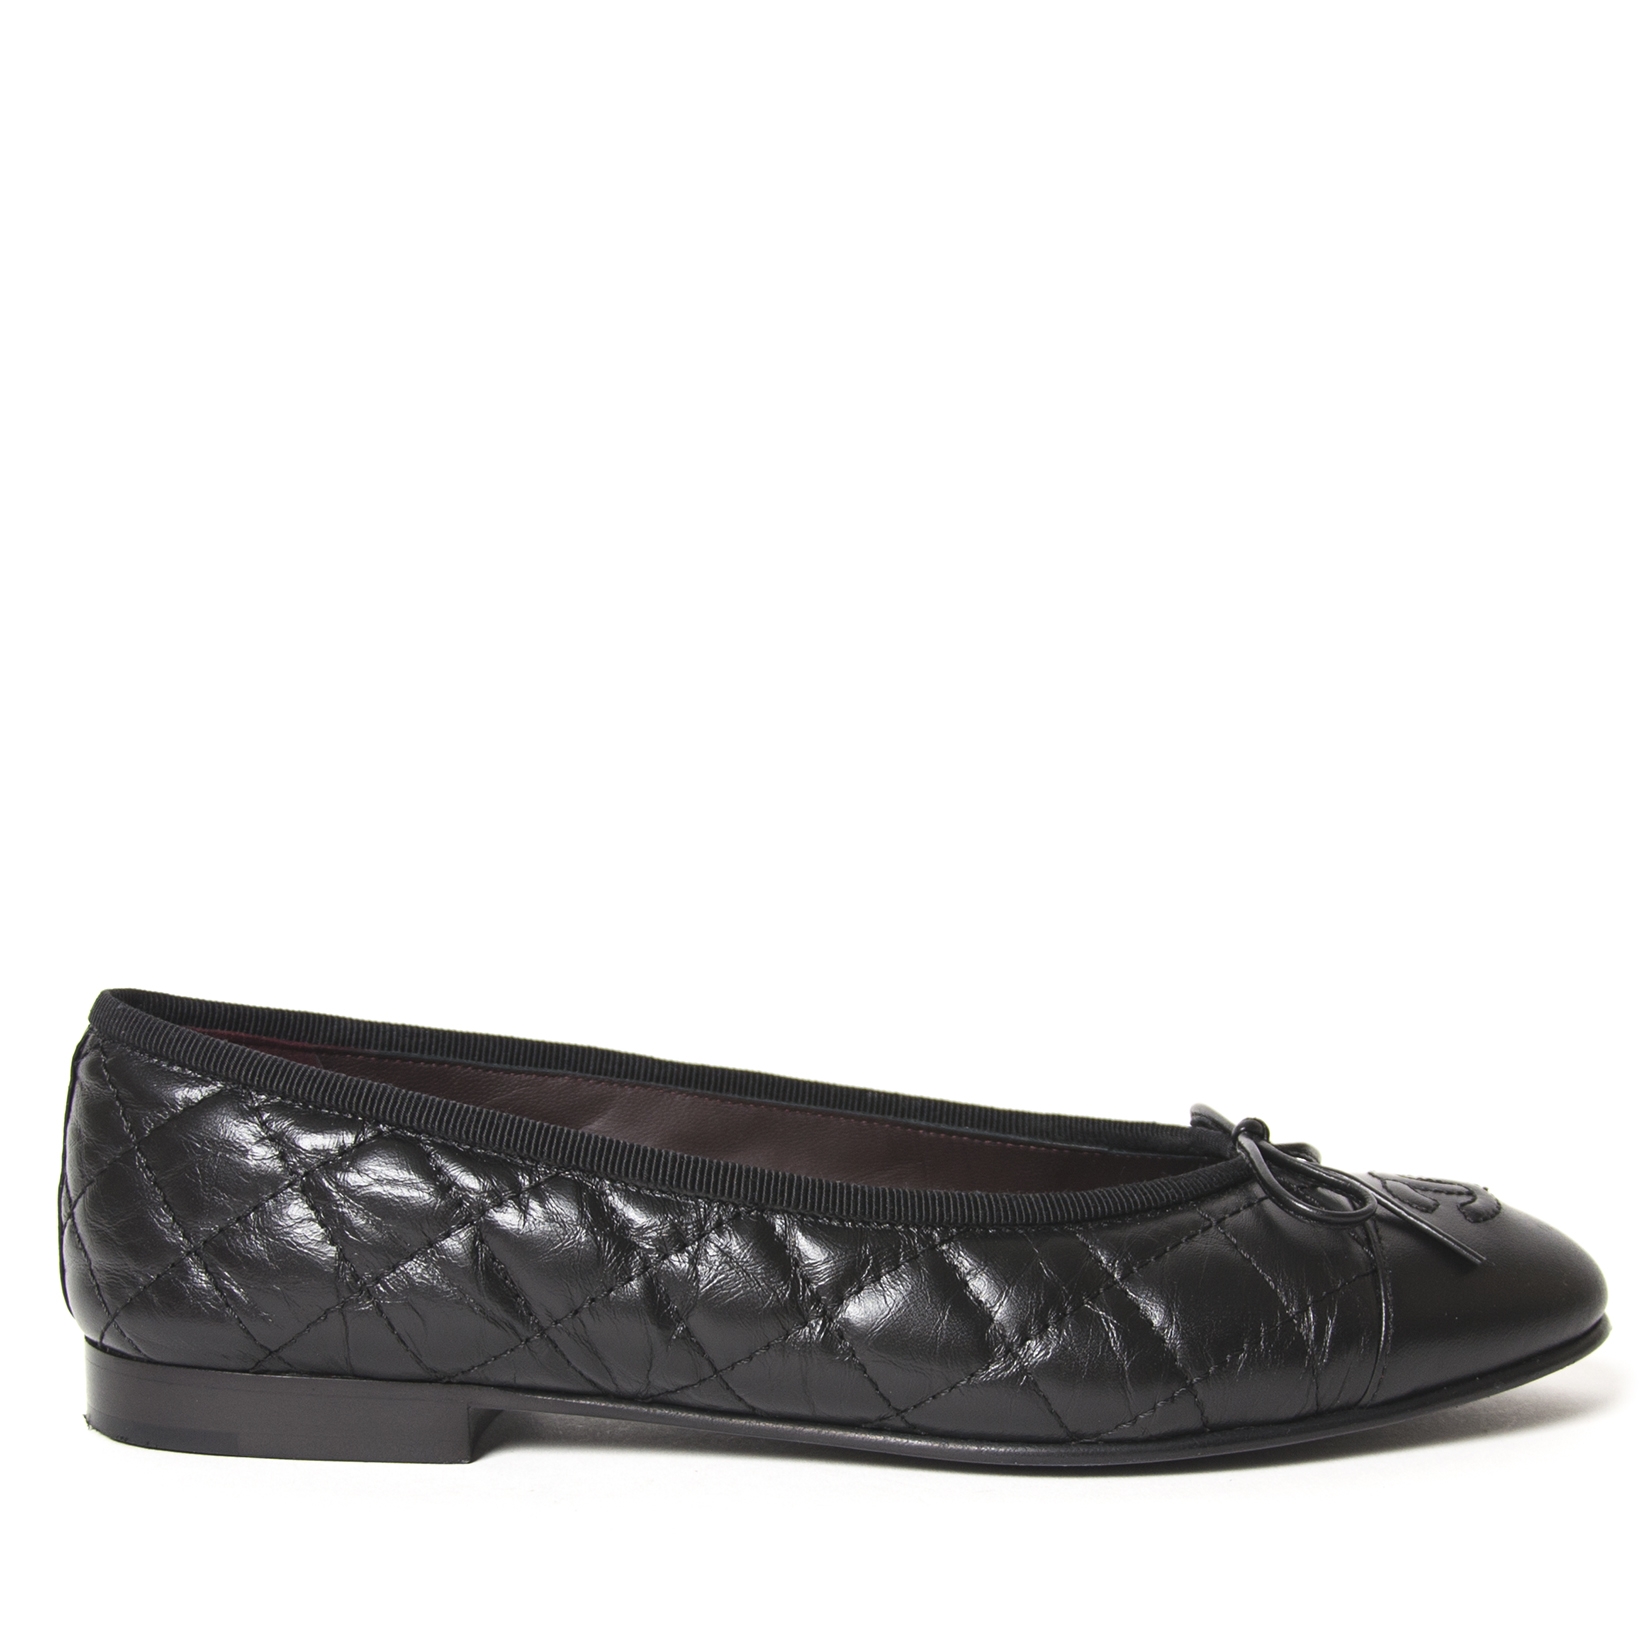 black leather chanel flats 38